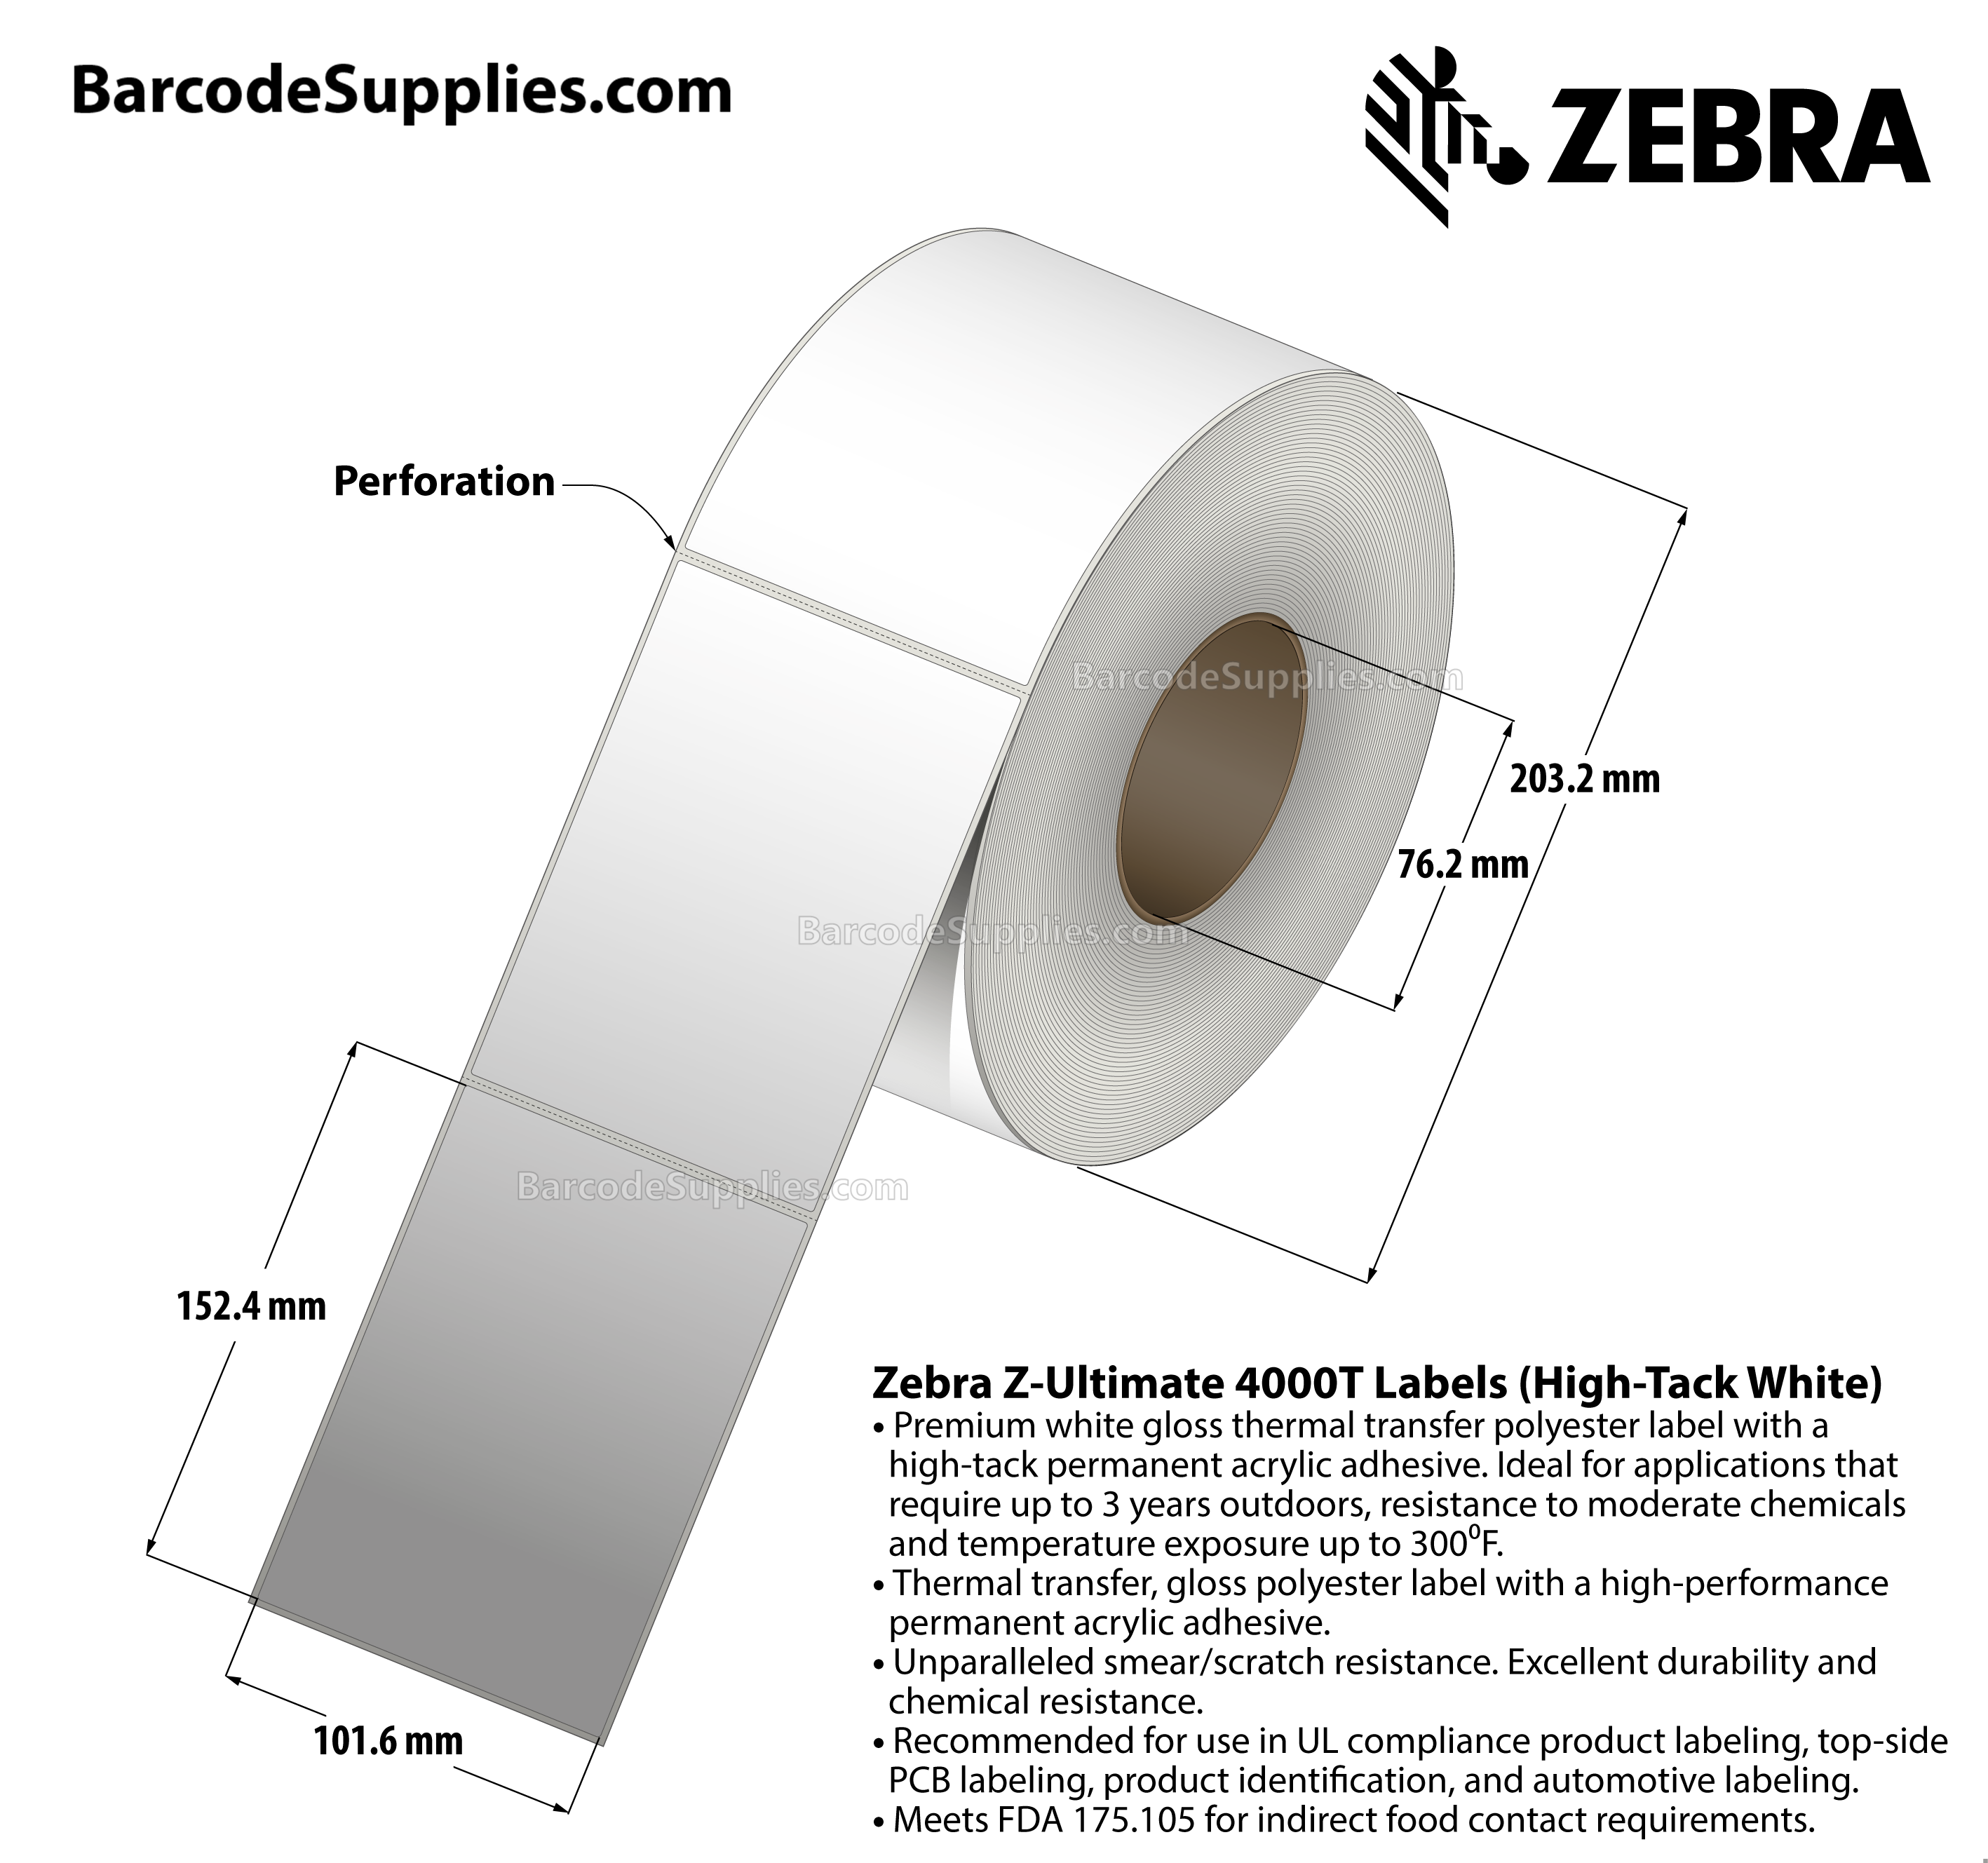 4 x 6 Thermal Transfer White Z-Ultimate 4000T High-Tack White Labels With High-tack Adhesive - Perforated - 790 Labels Per Roll - Carton Of 4 Rolls - 3160 Labels Total - MPN: 10008519